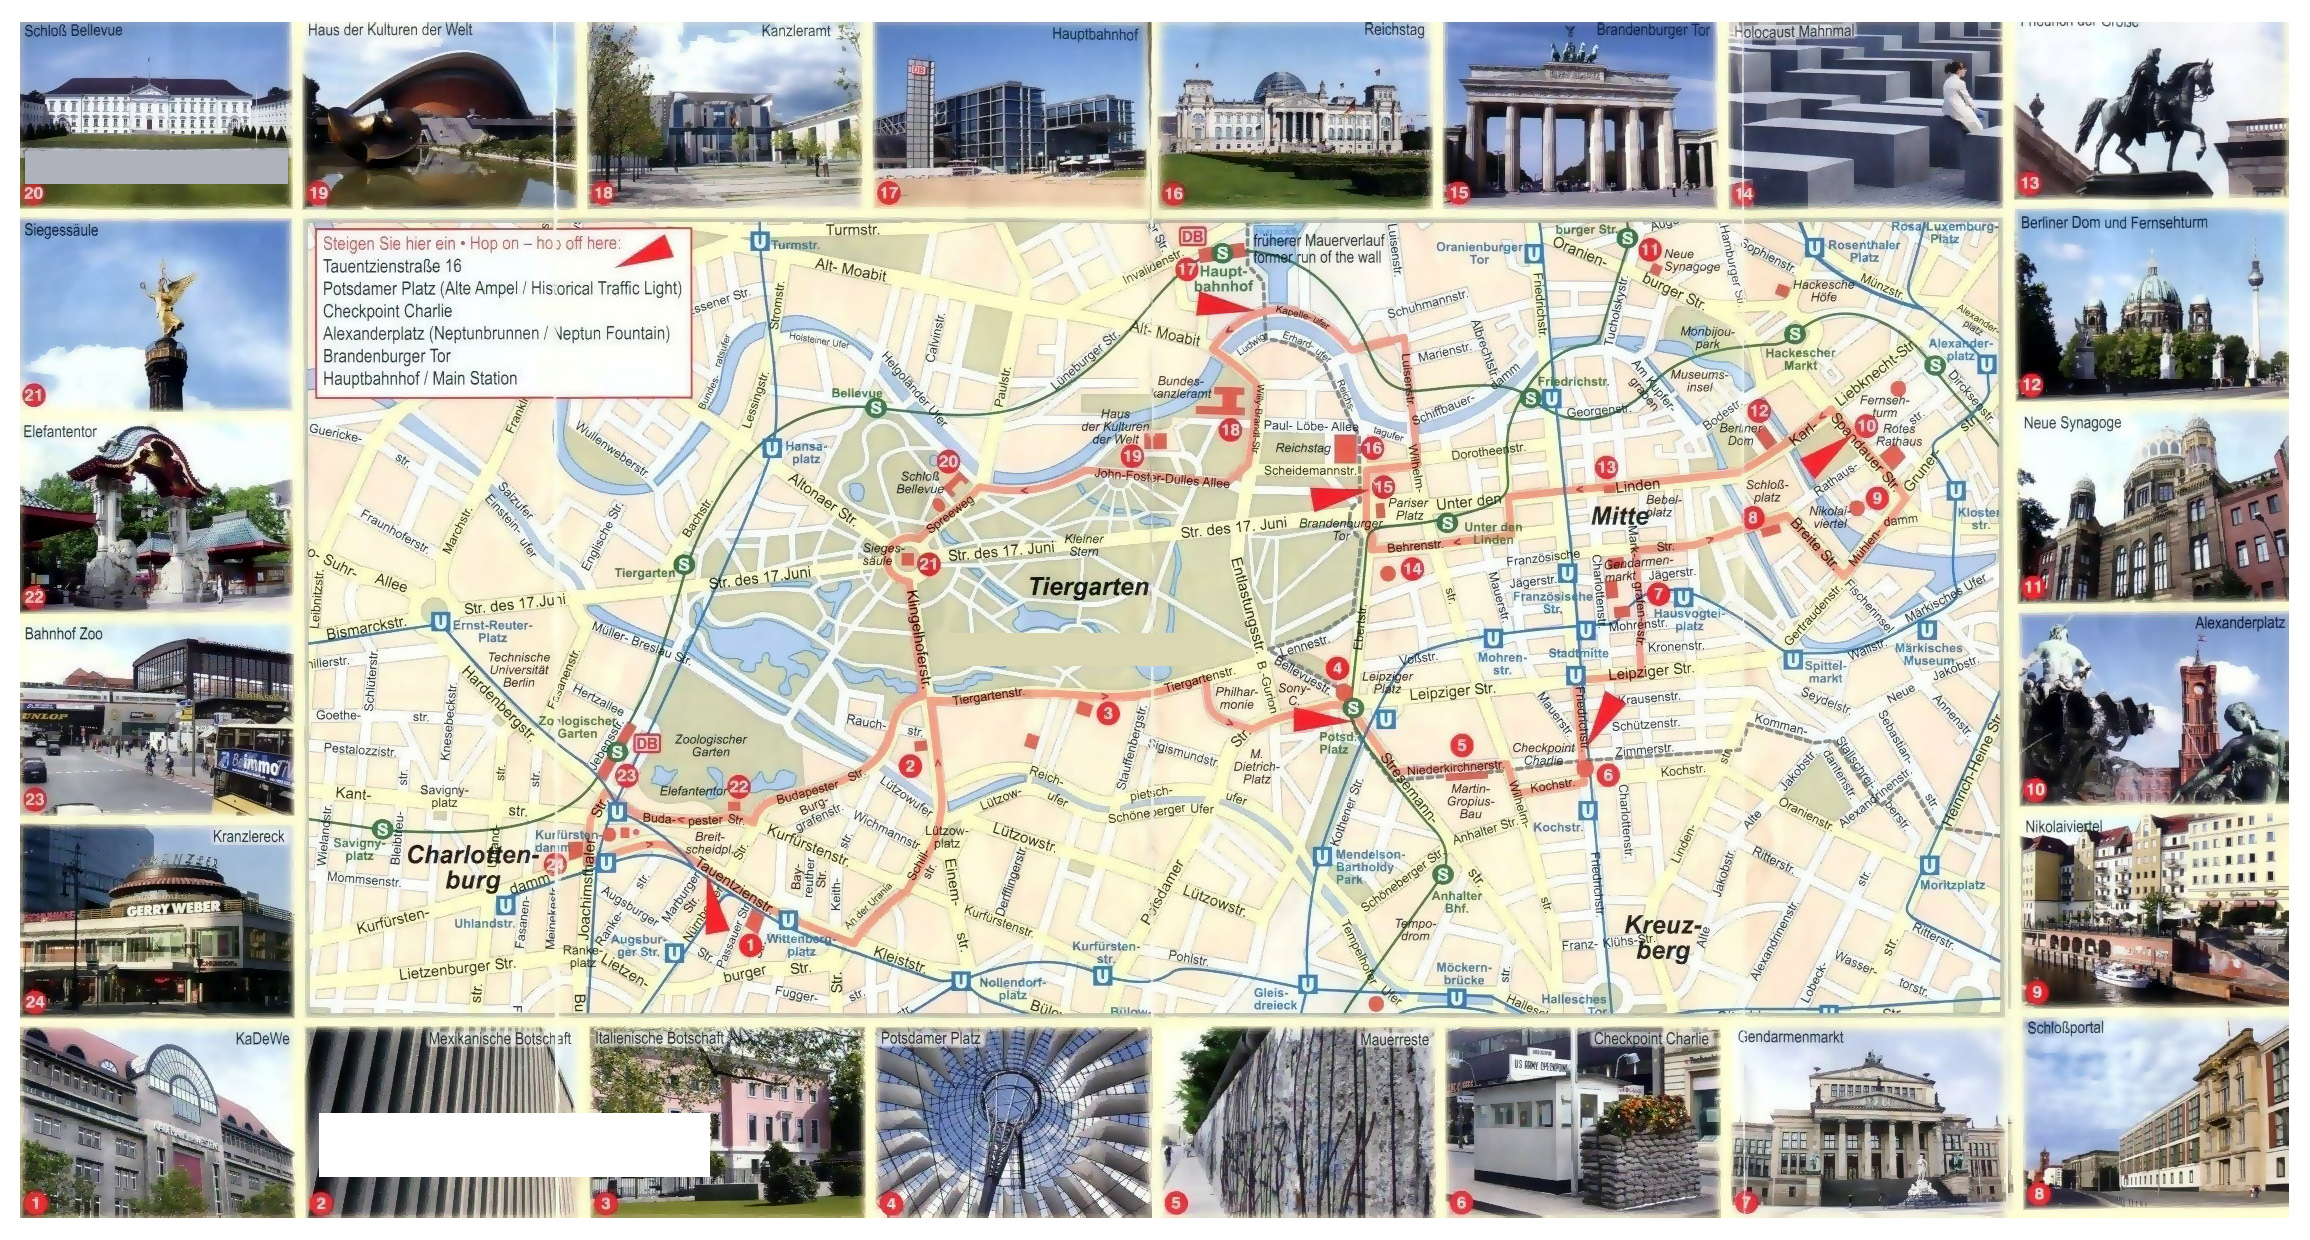 large-tourist-map-of-central-part-of-berlin-city-vidiani-maps